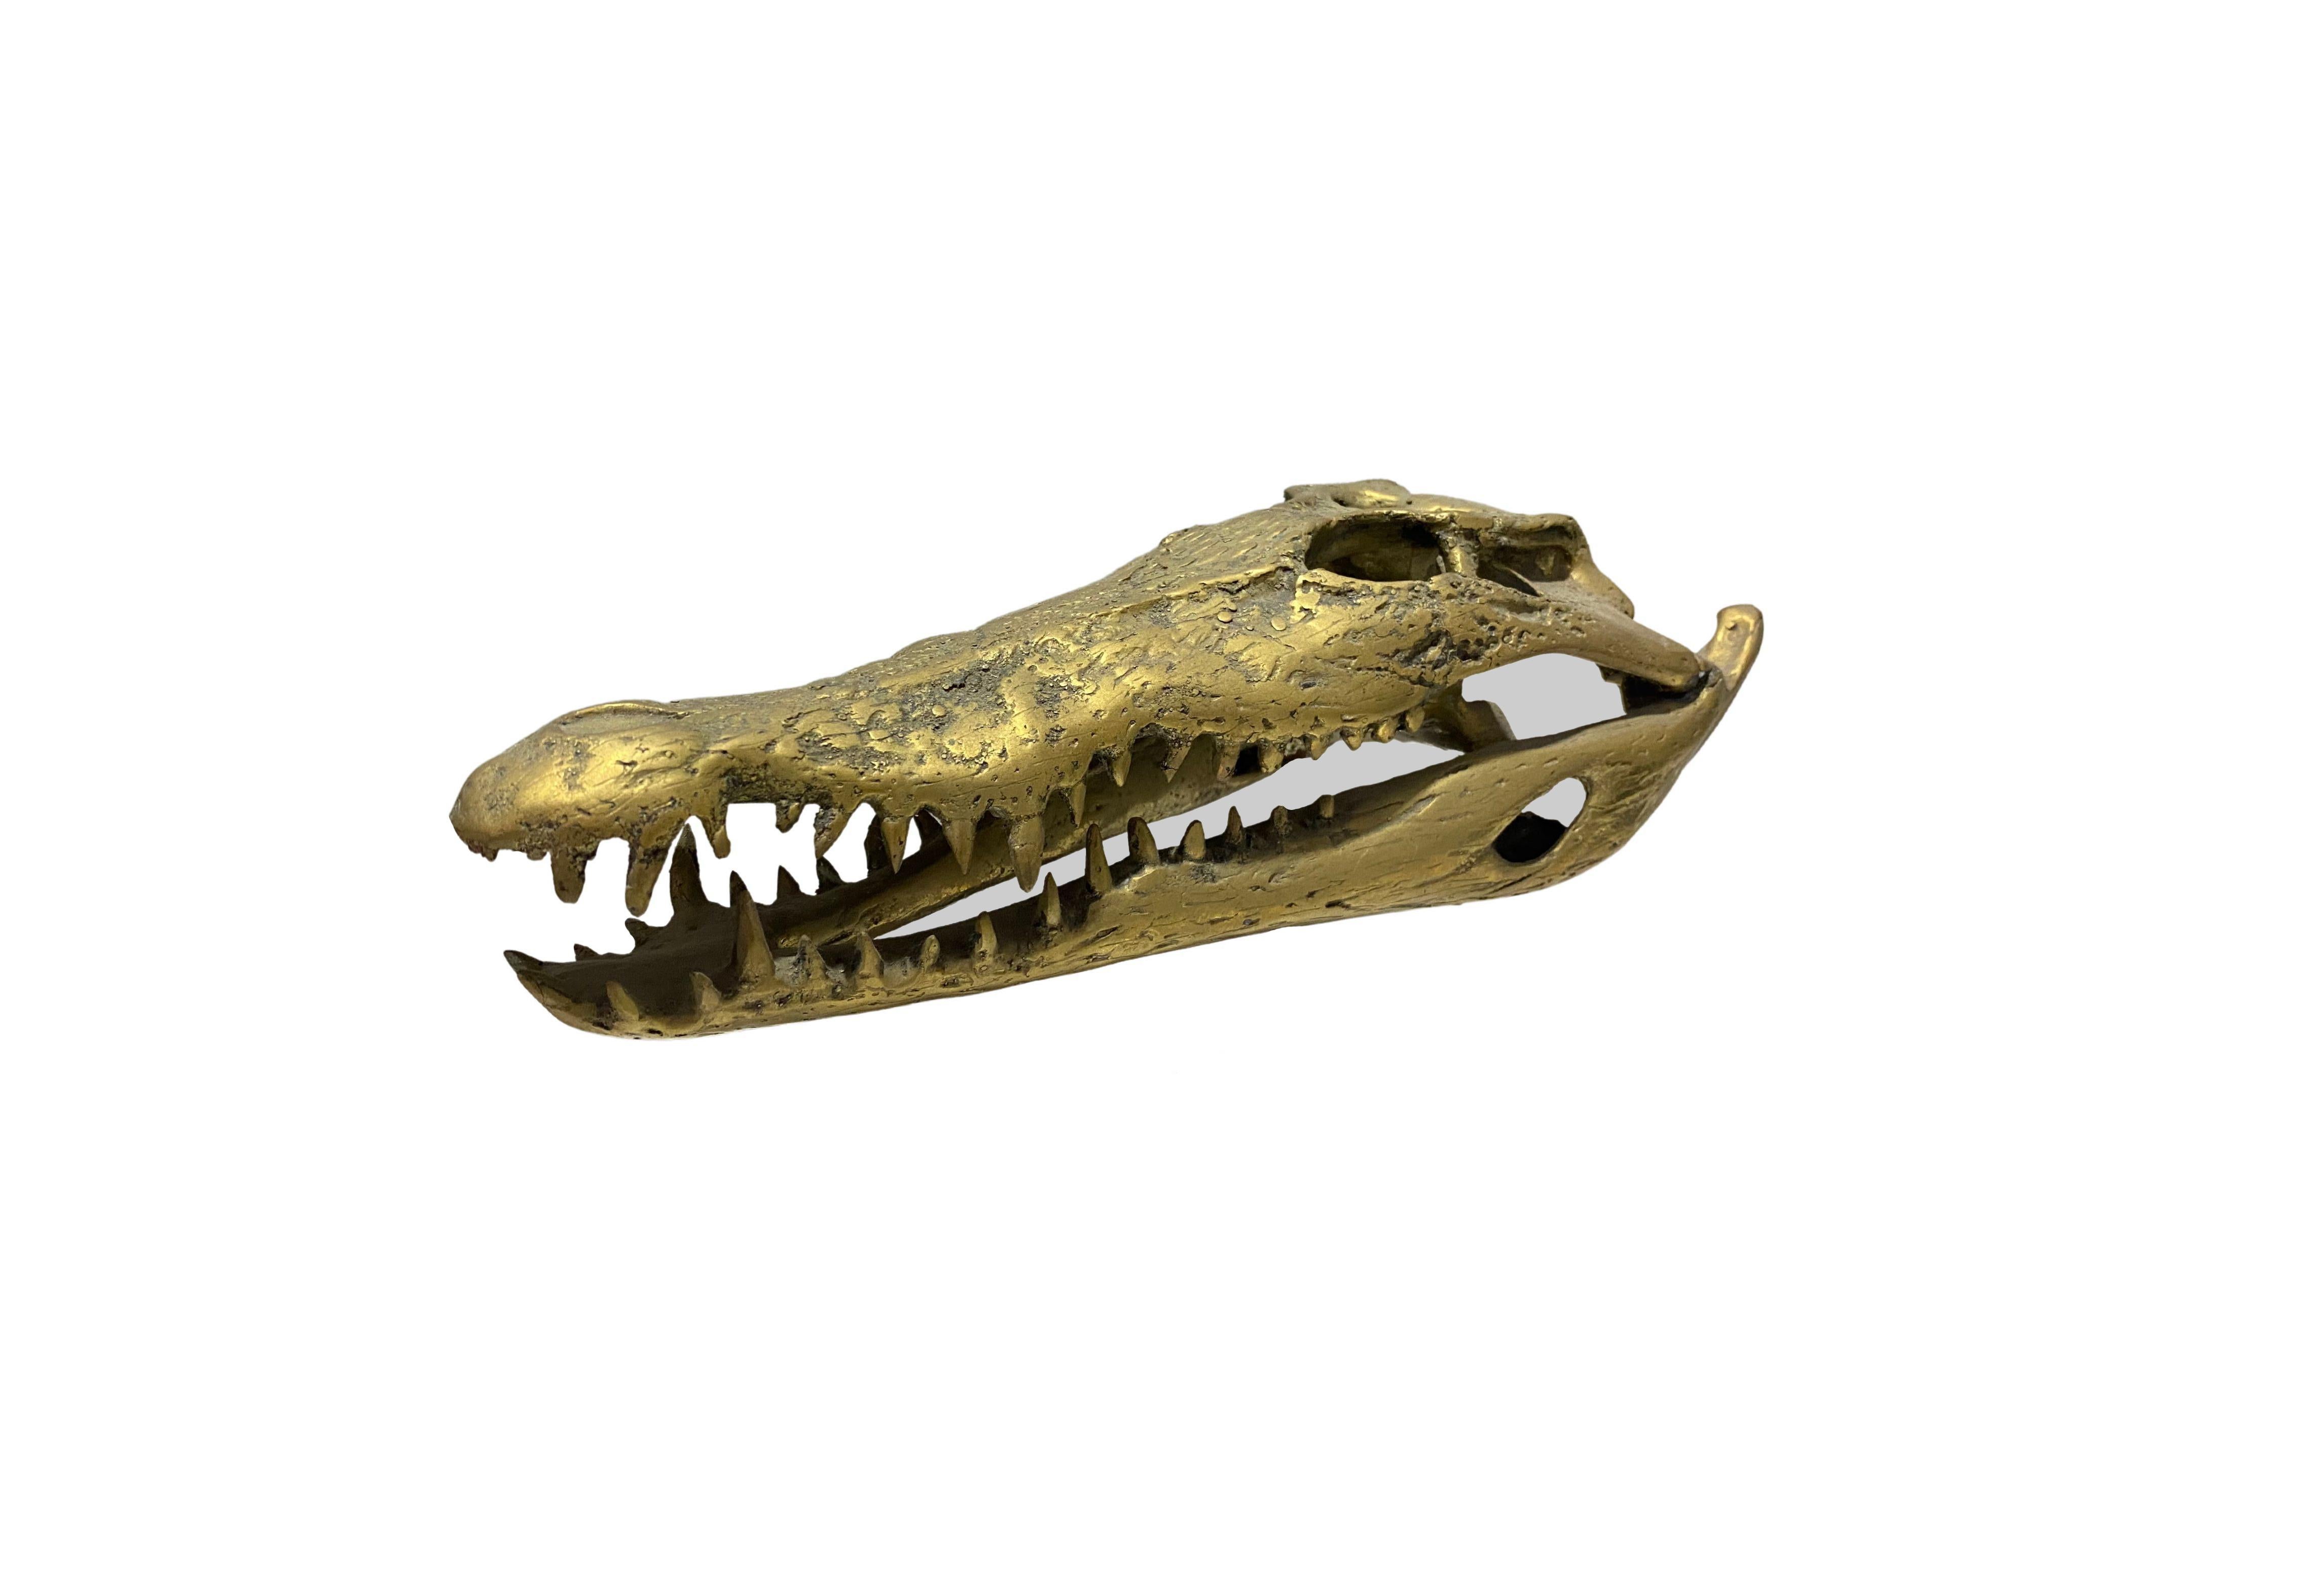 A wonderful example of a hollow-cast bronze crocodile skull. This piece features wonderful detail and resemblance to a real specimen. An exotic piece certain to invoke conversation. Suitable for both indoor or outdoor spaces. To achieve its its gold